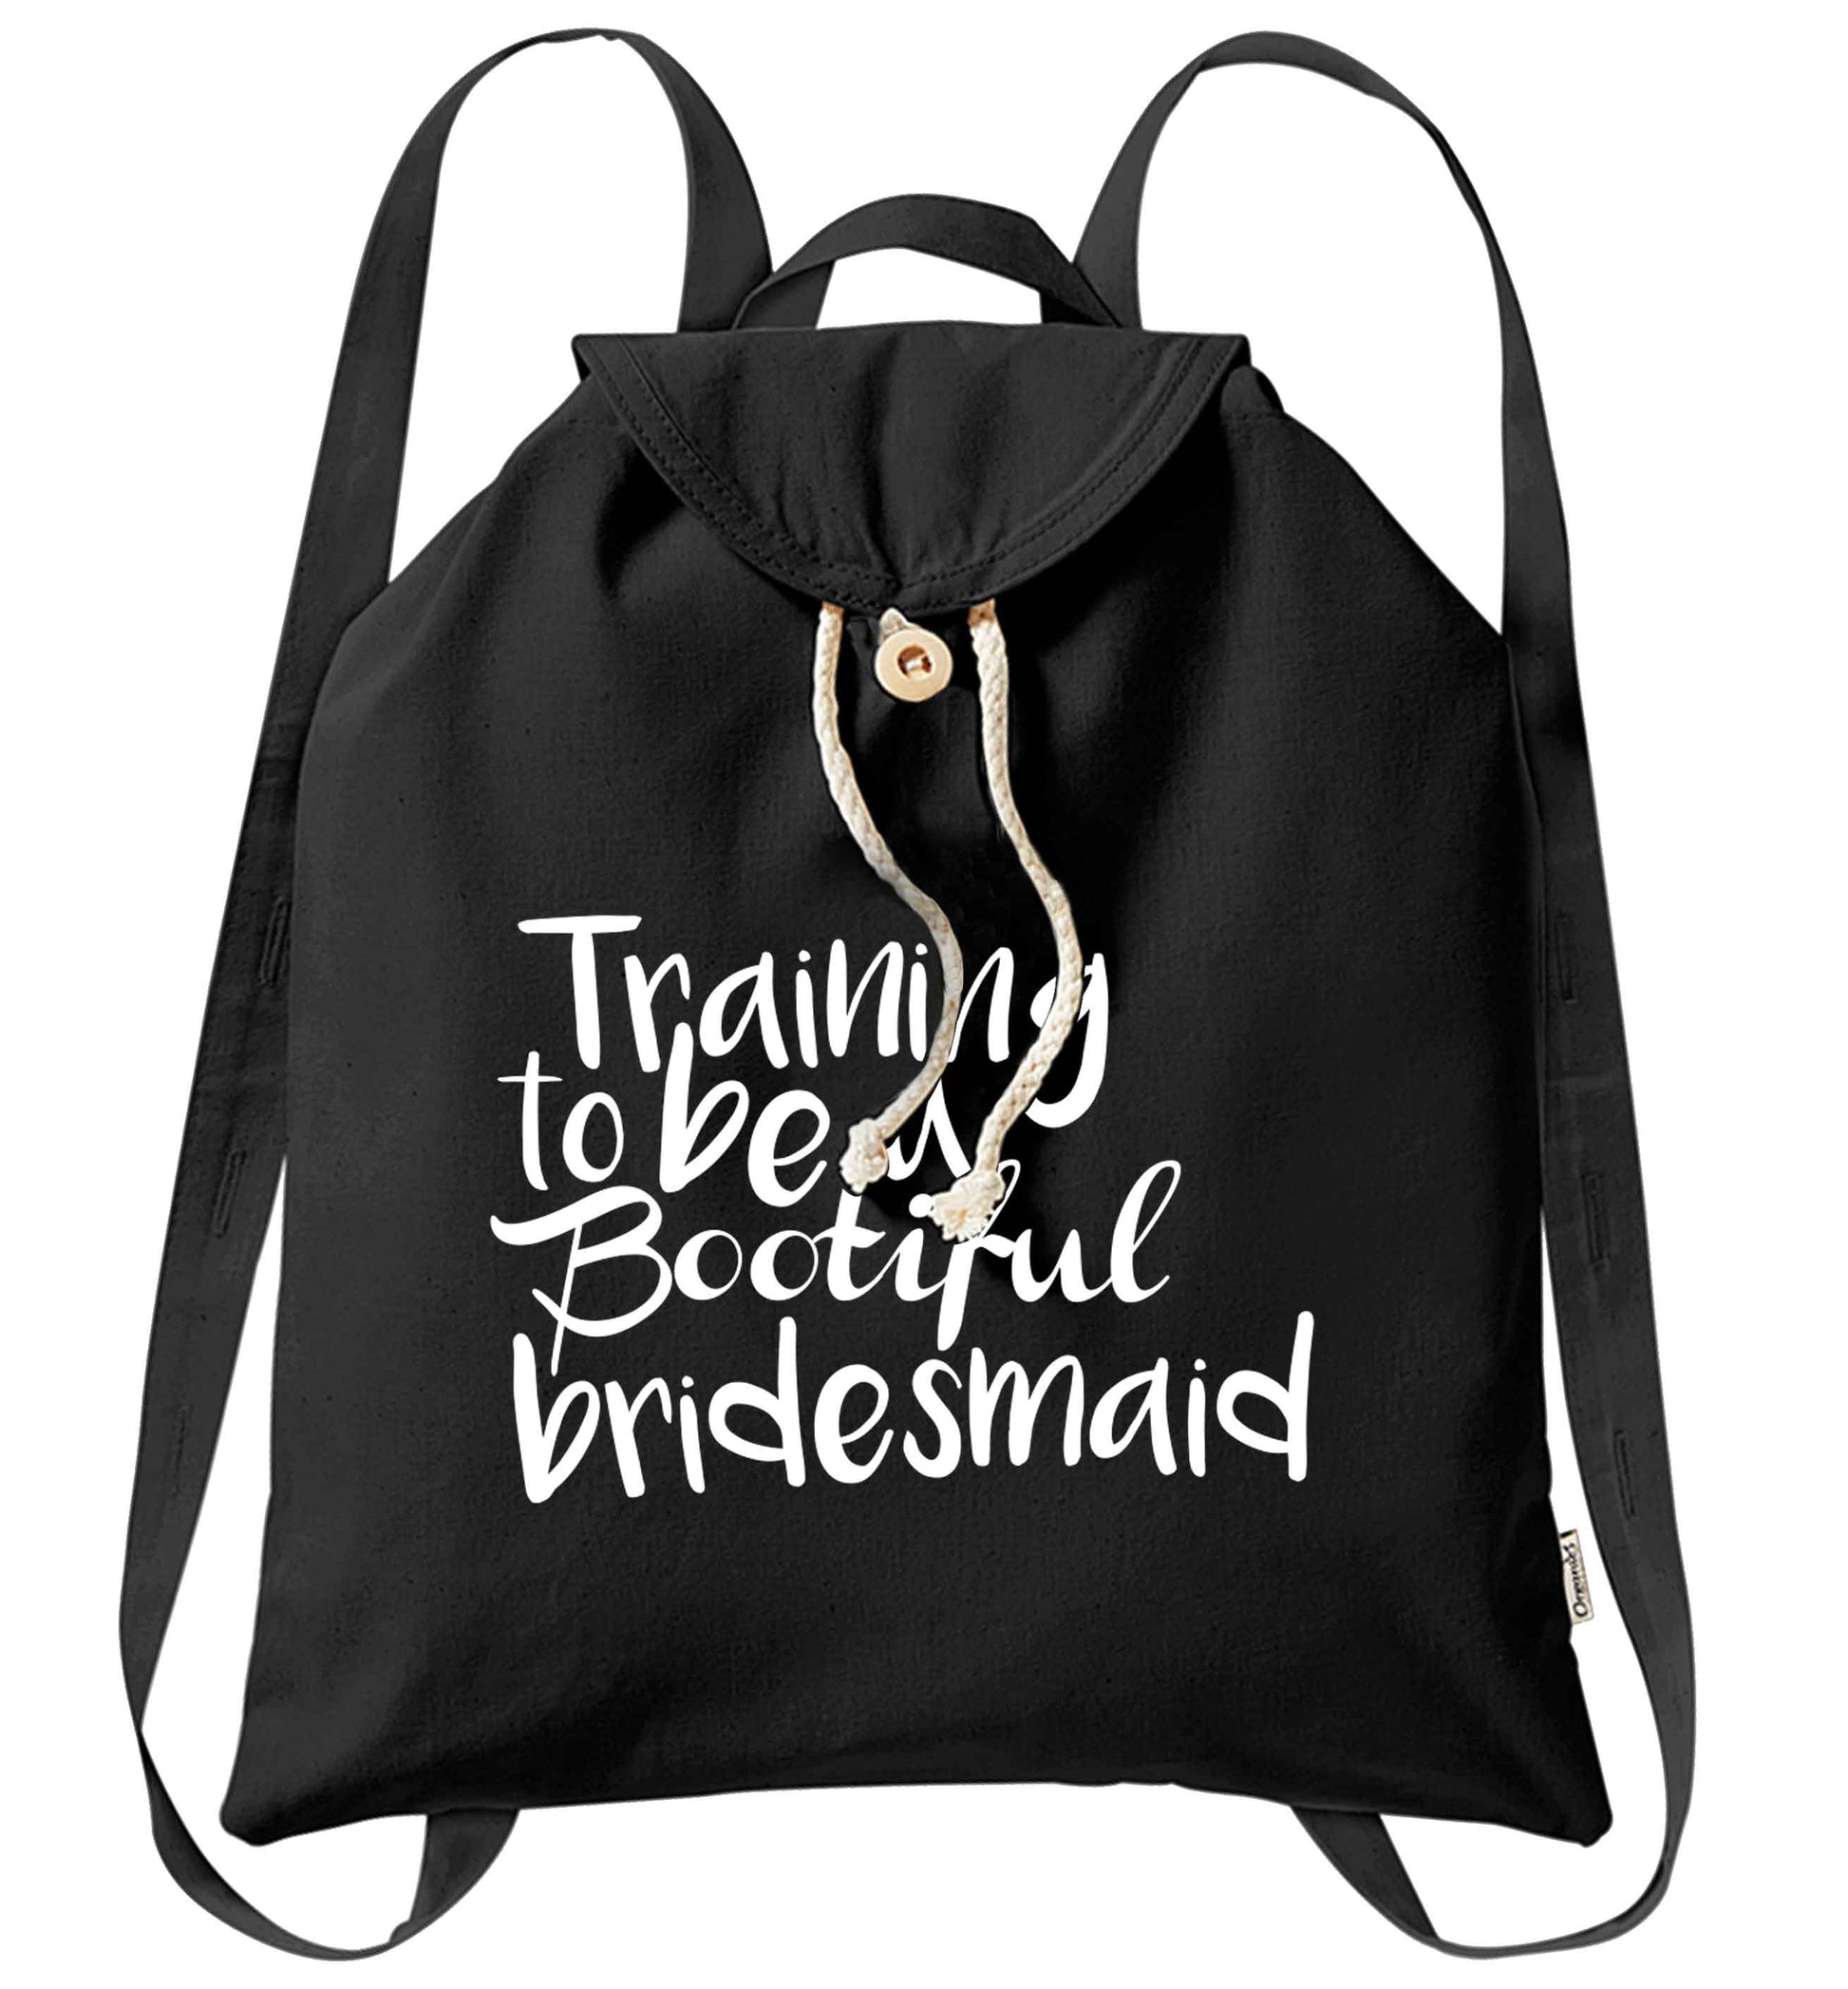 Get motivated and get fit for your big day! Our workout quotes and designs will get you ready to sweat! Perfect for any bride, groom or bridesmaid to be!  organic cotton backpack tote with wooden buttons in black